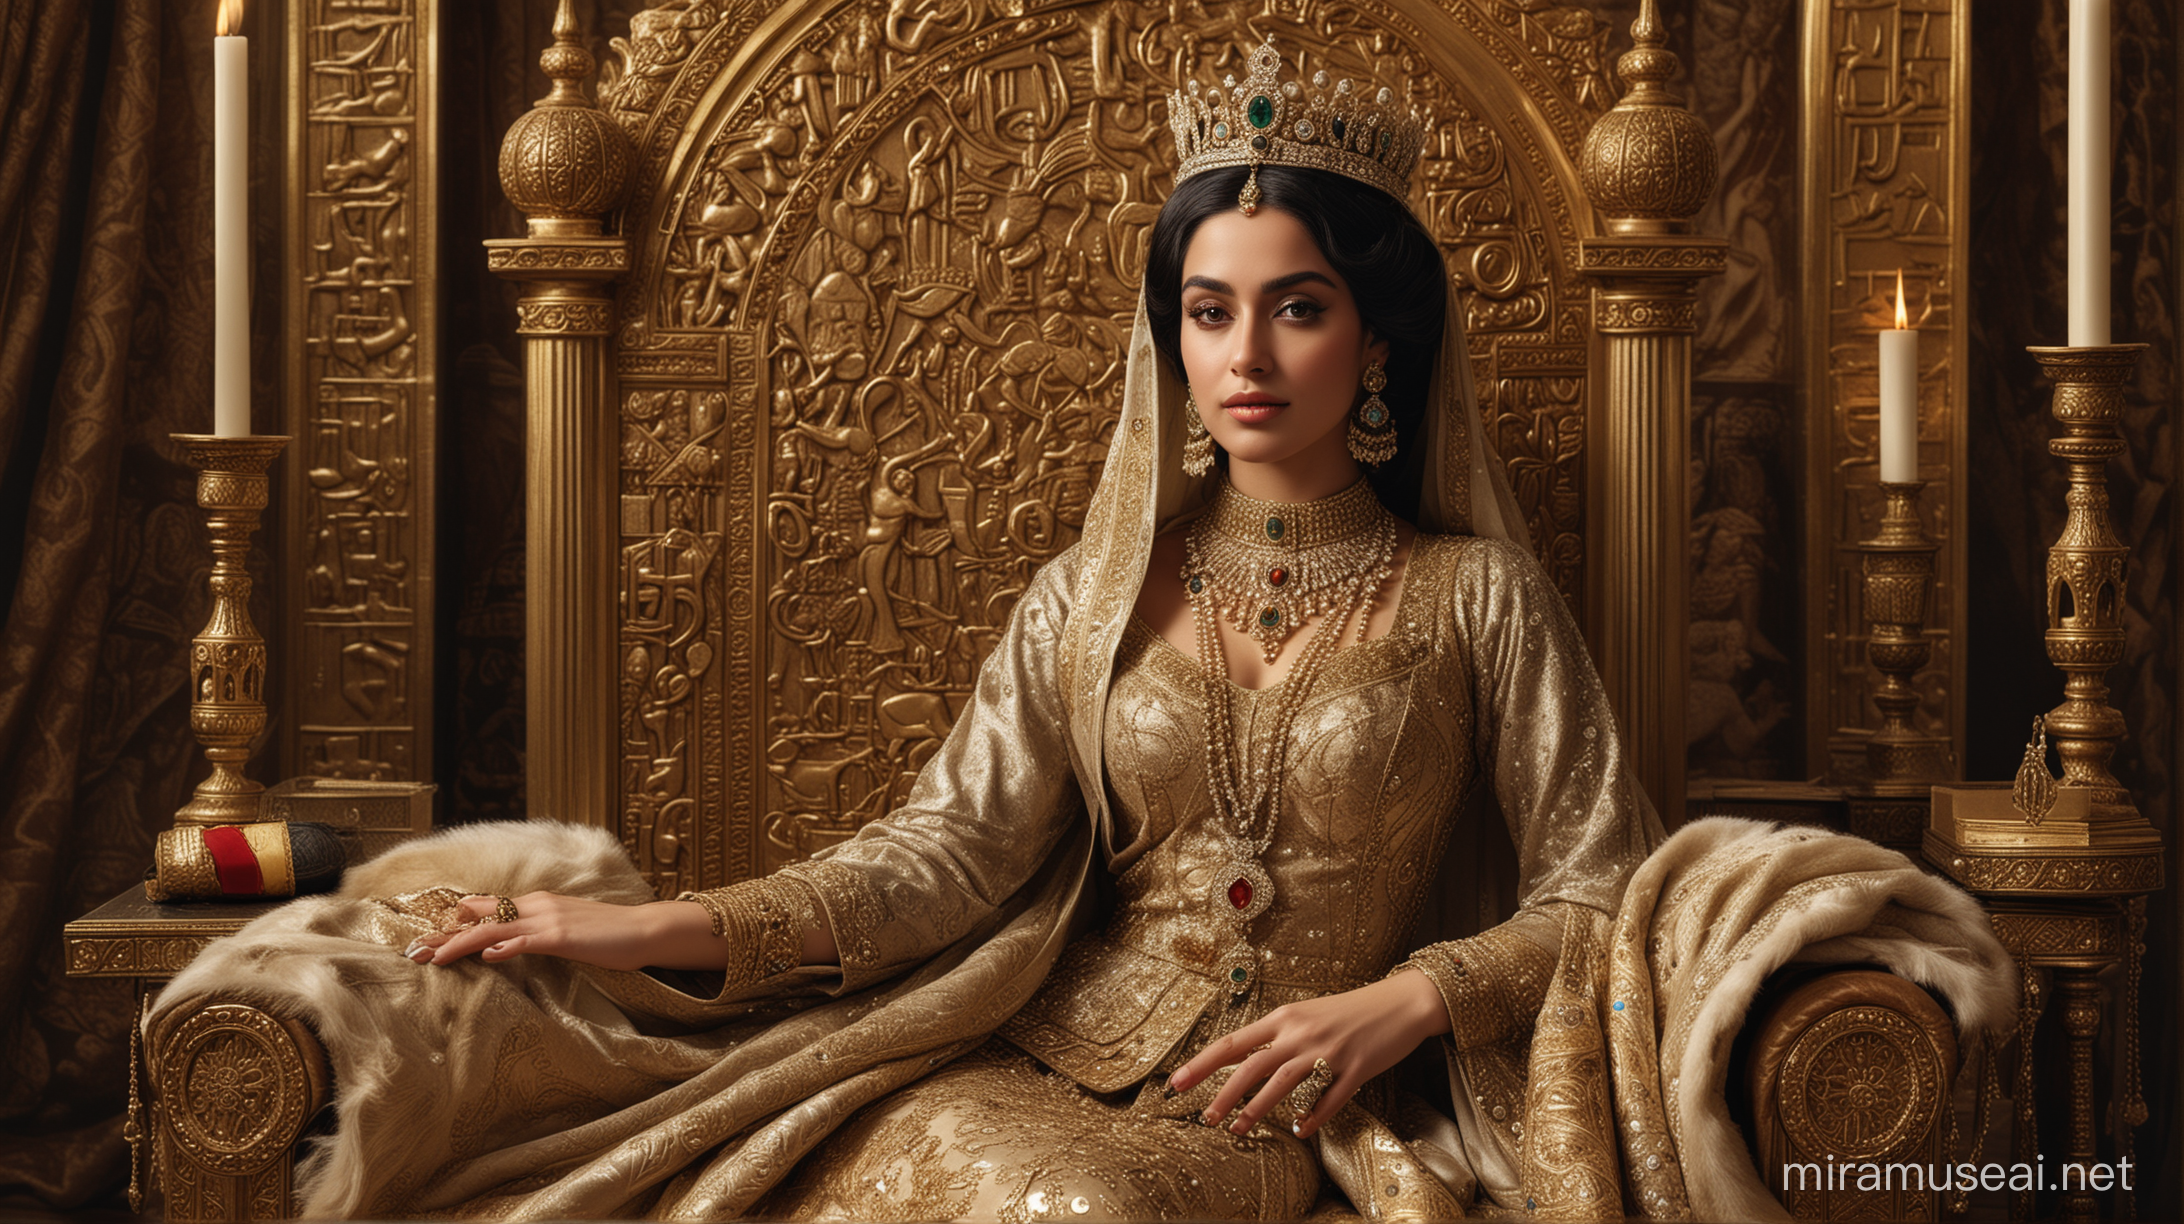 Create an evocative image capturing the regal presence of Queen Bilqis, adorned in opulent attire, sitting upon her throne with an aura of wisdom and power. Surround her with symbols of her kingdom's prosperity and the mystique of her legendary reign